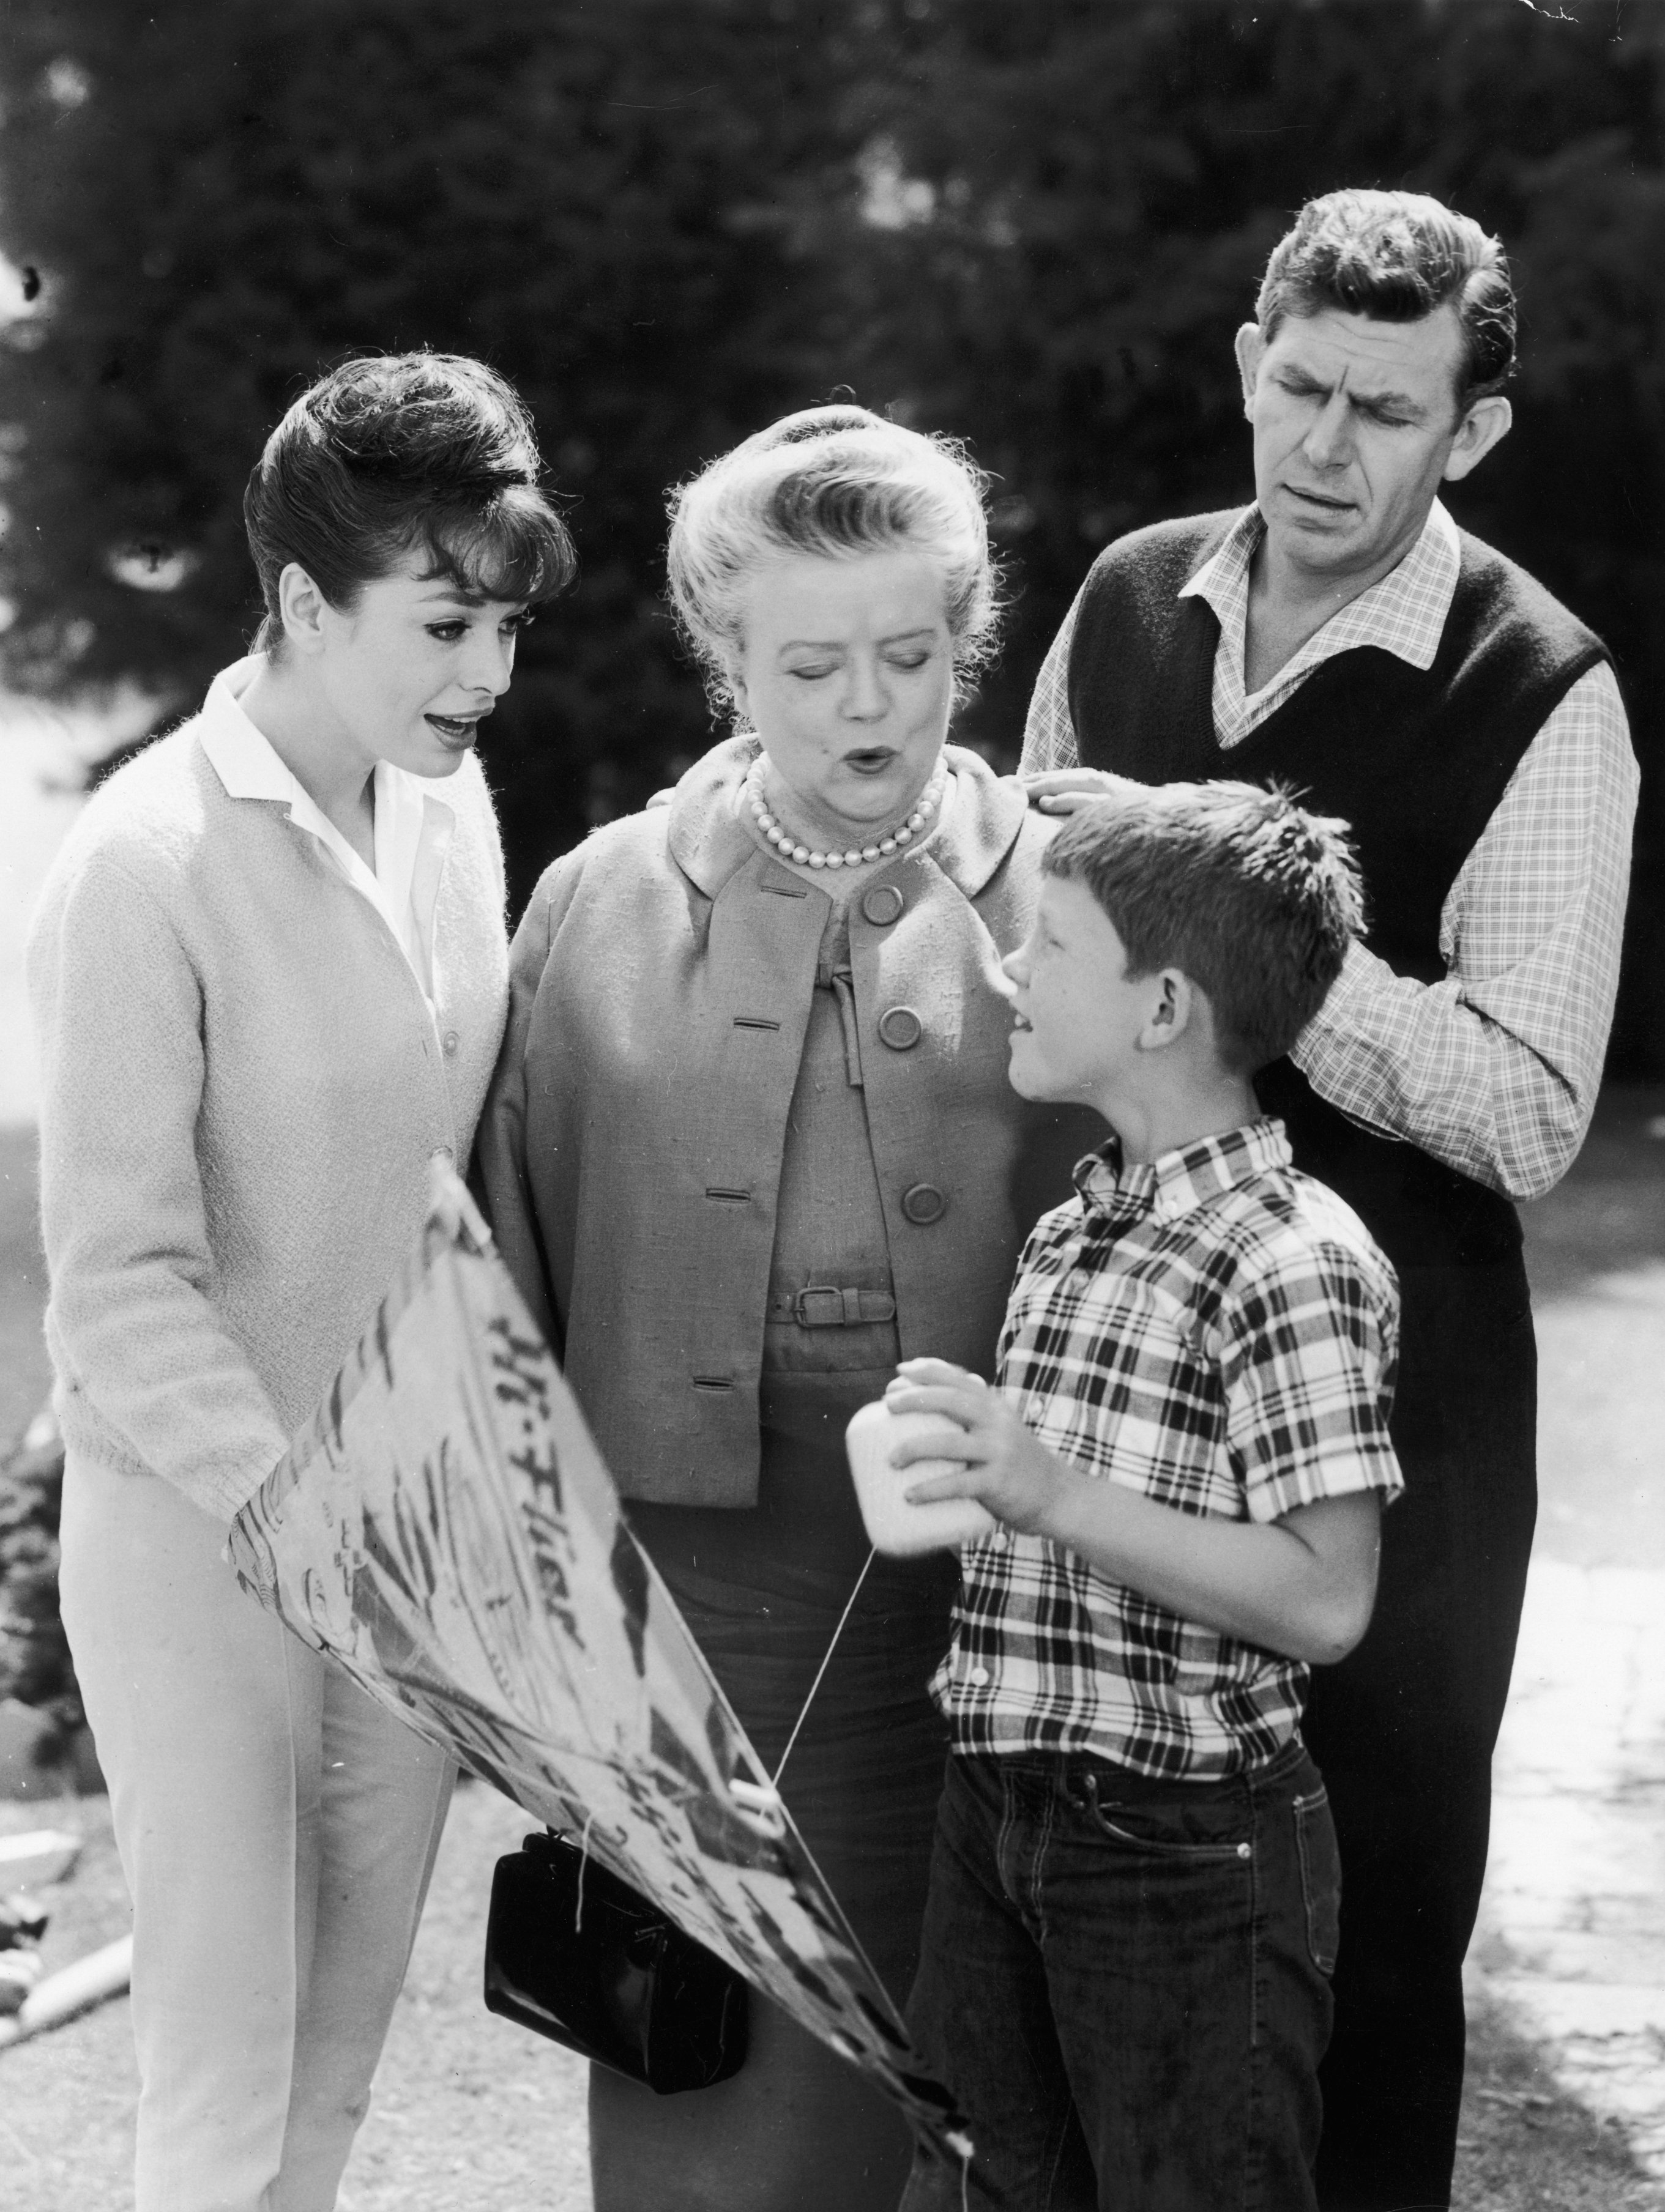 Aneta Corseaut, Frances Bavier, Ron Howard, and Andy Griffith in a promotional still for the television series "The Andy Griffith Show" | Photo: Hulton Archive/Getty Images